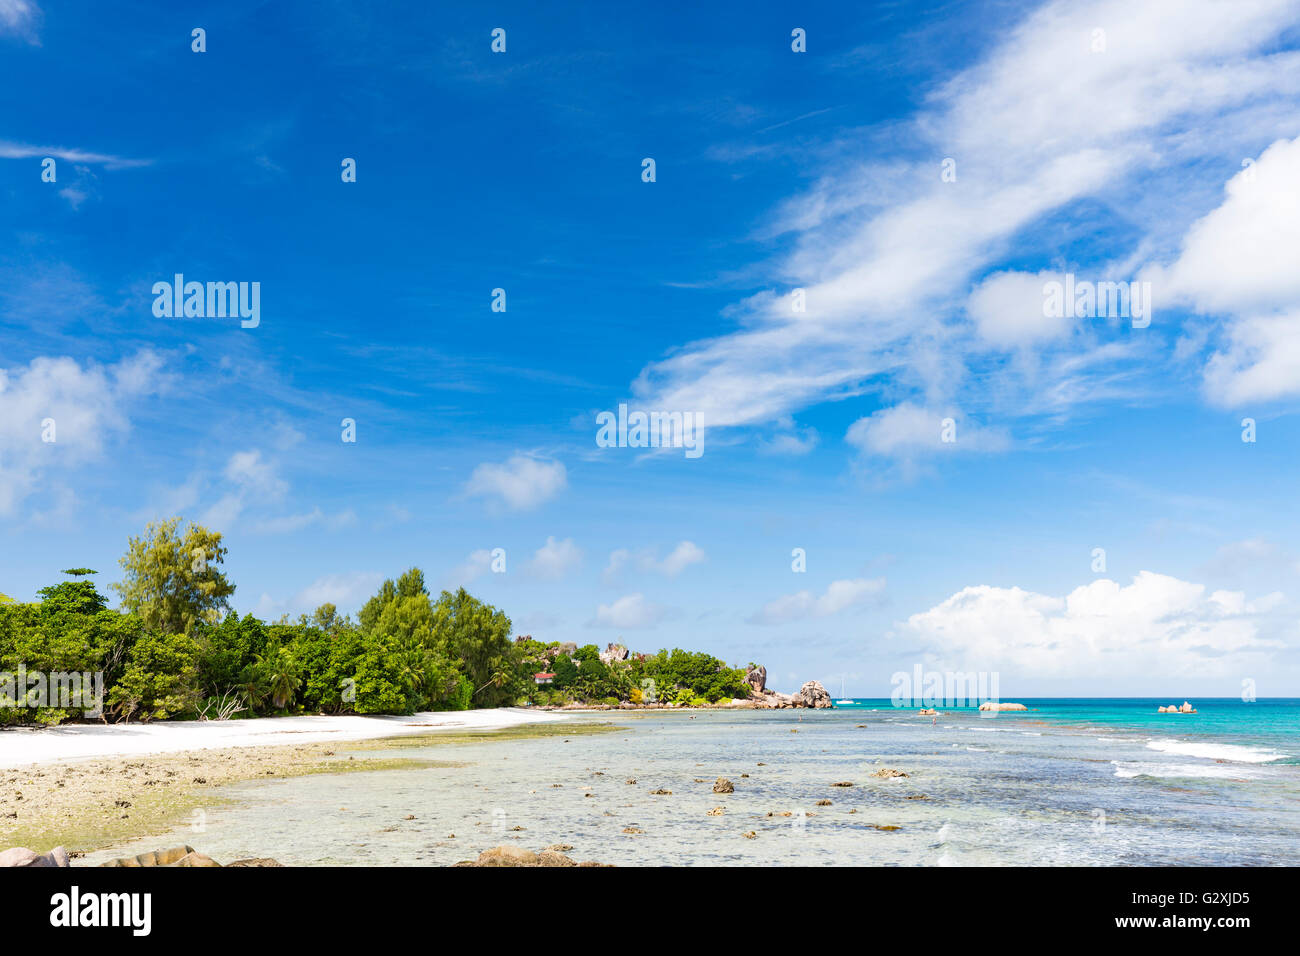 Low tide at Anse Severe in La Digue, Seychelles with palm trees and granite rocks Stock Photo